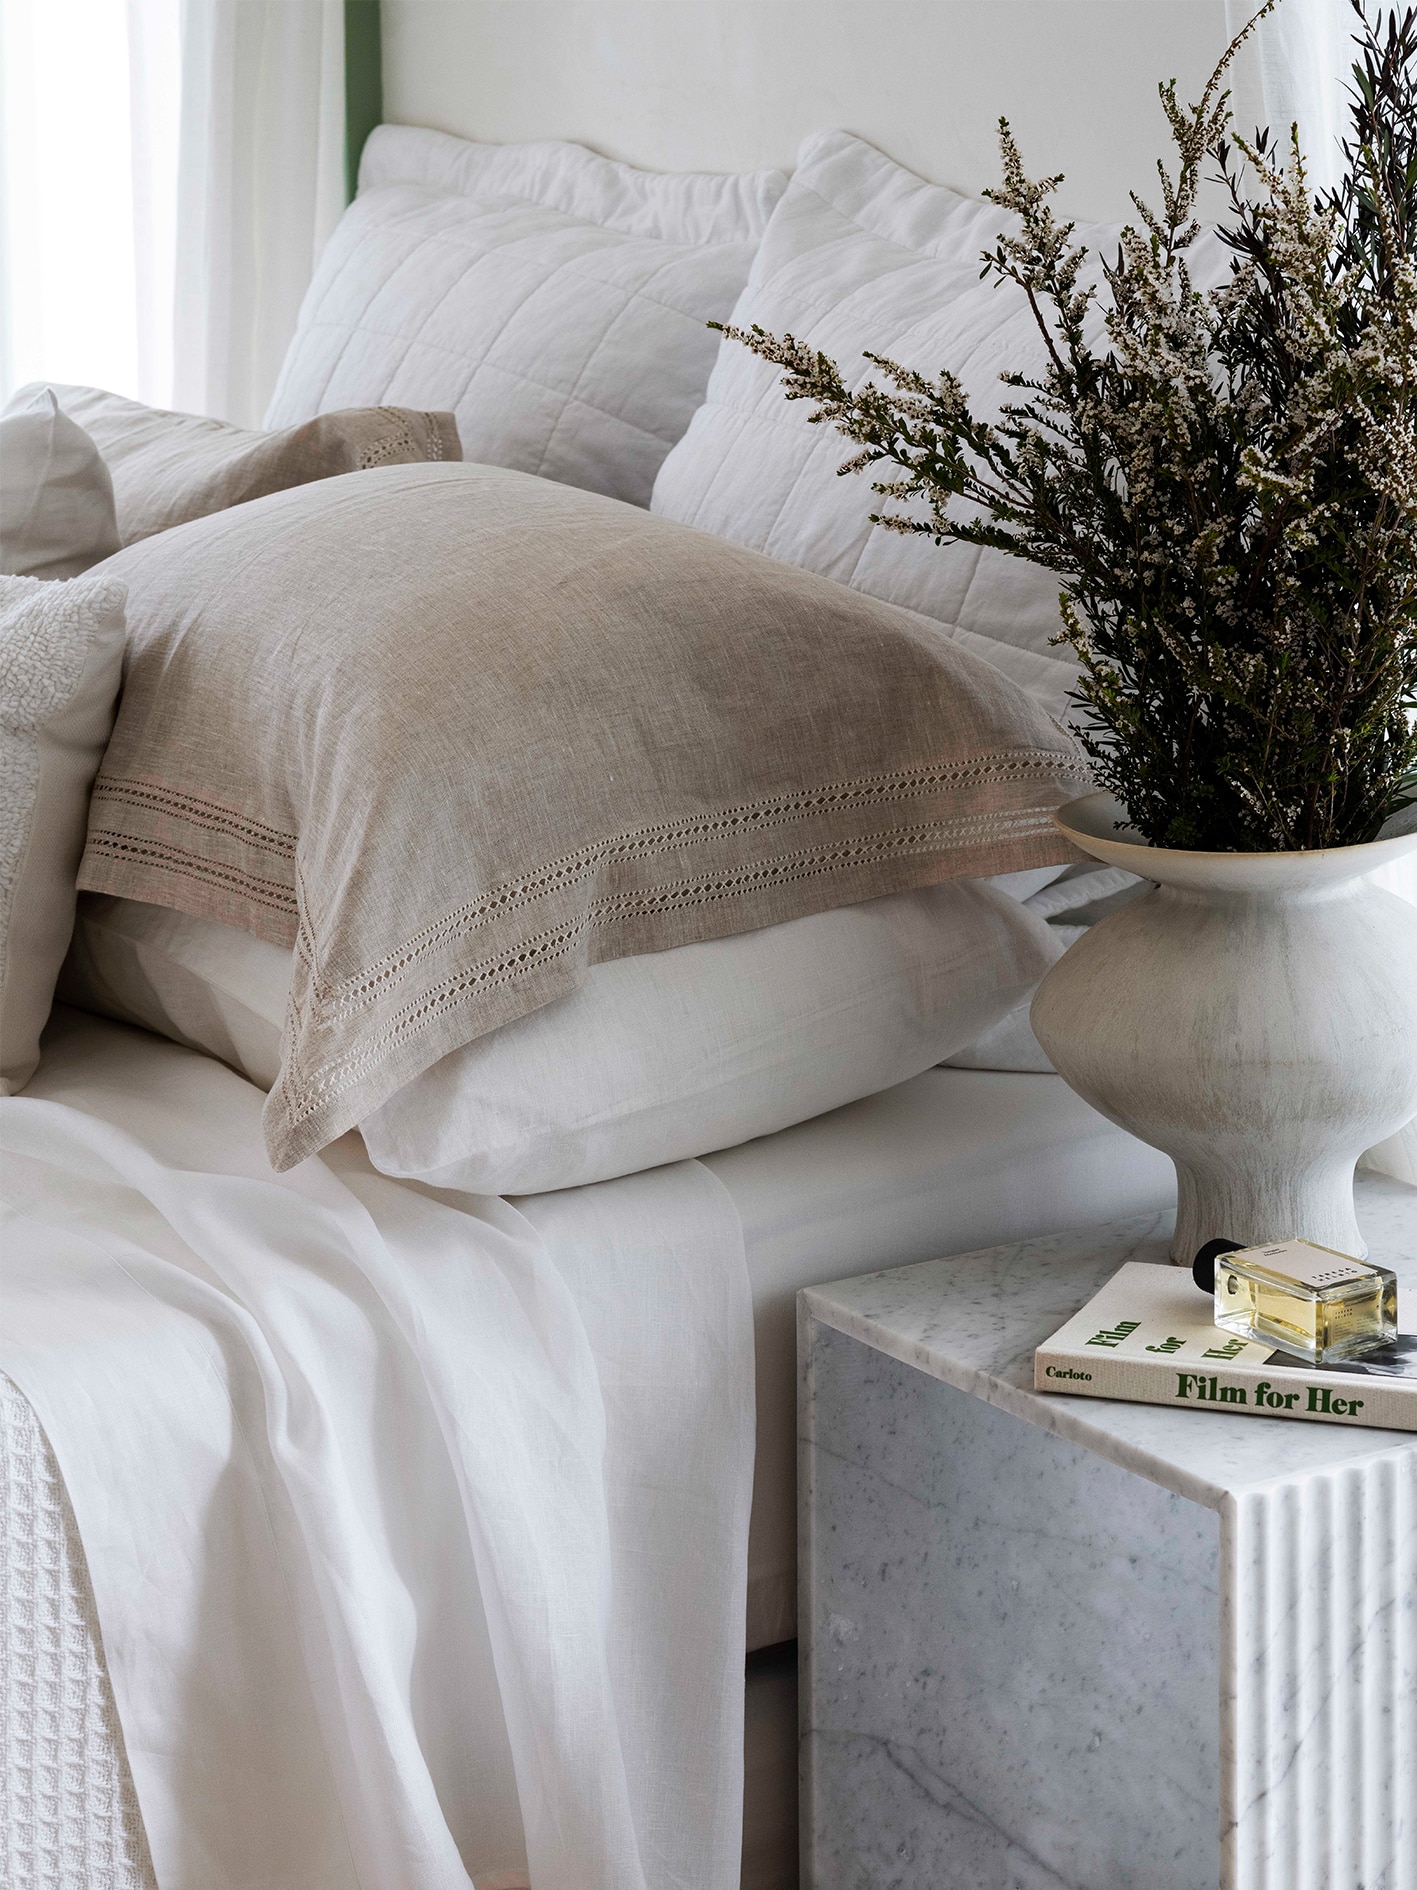 styled bed. six cushions stacked neatly, in shades of white and flax. marble bedside table sits next to bed, with a book and plant in marble pot.